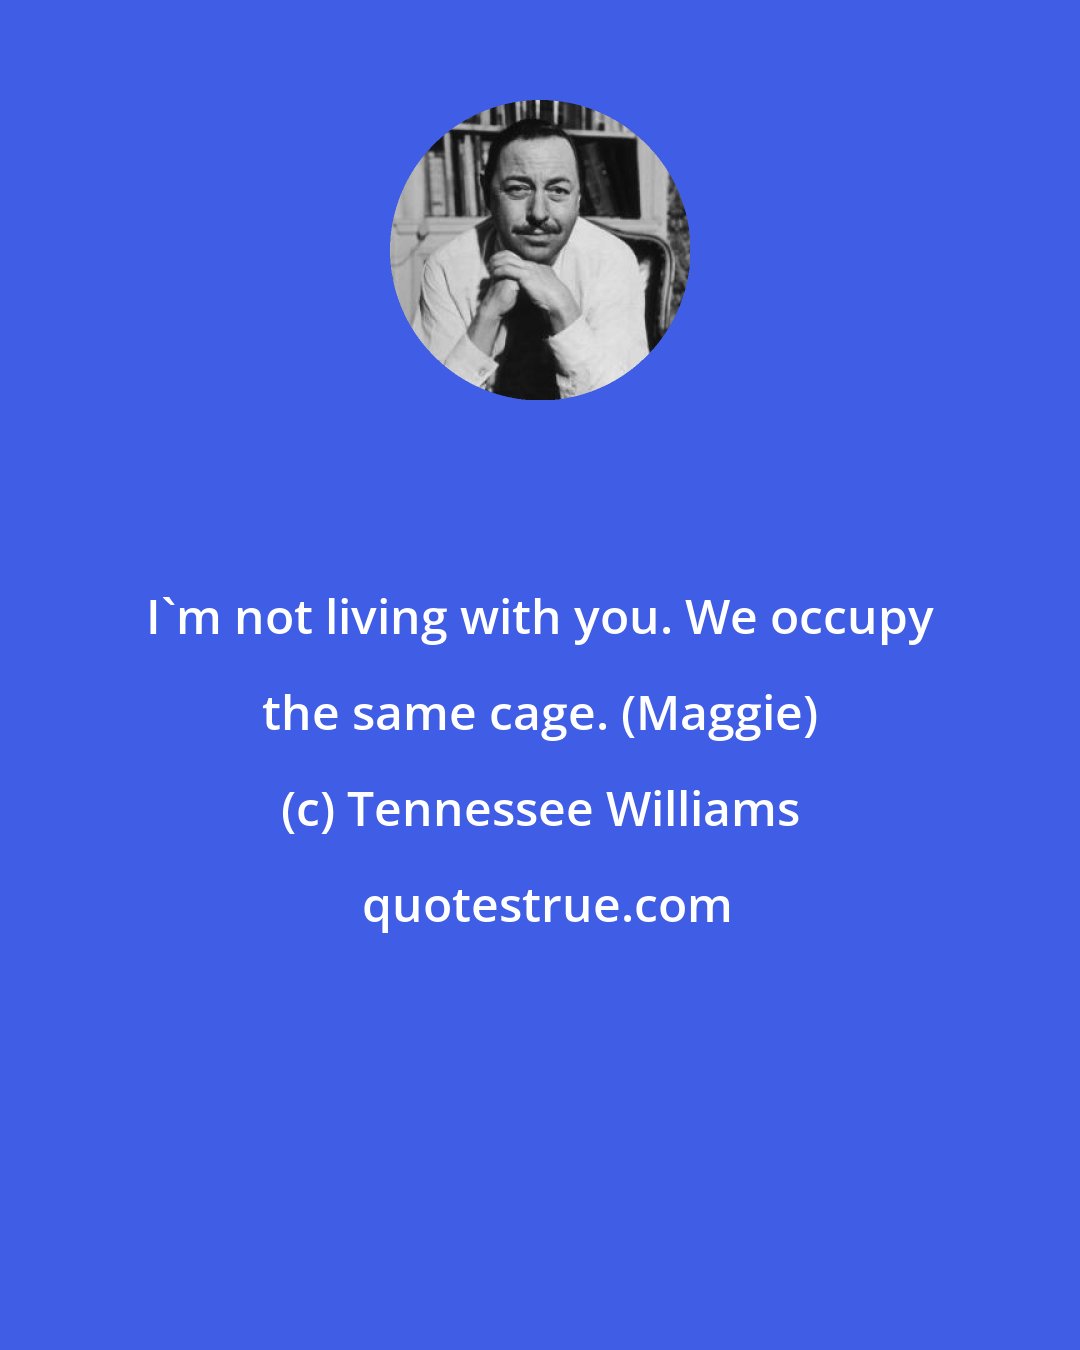 Tennessee Williams: I'm not living with you. We occupy the same cage. (Maggie)